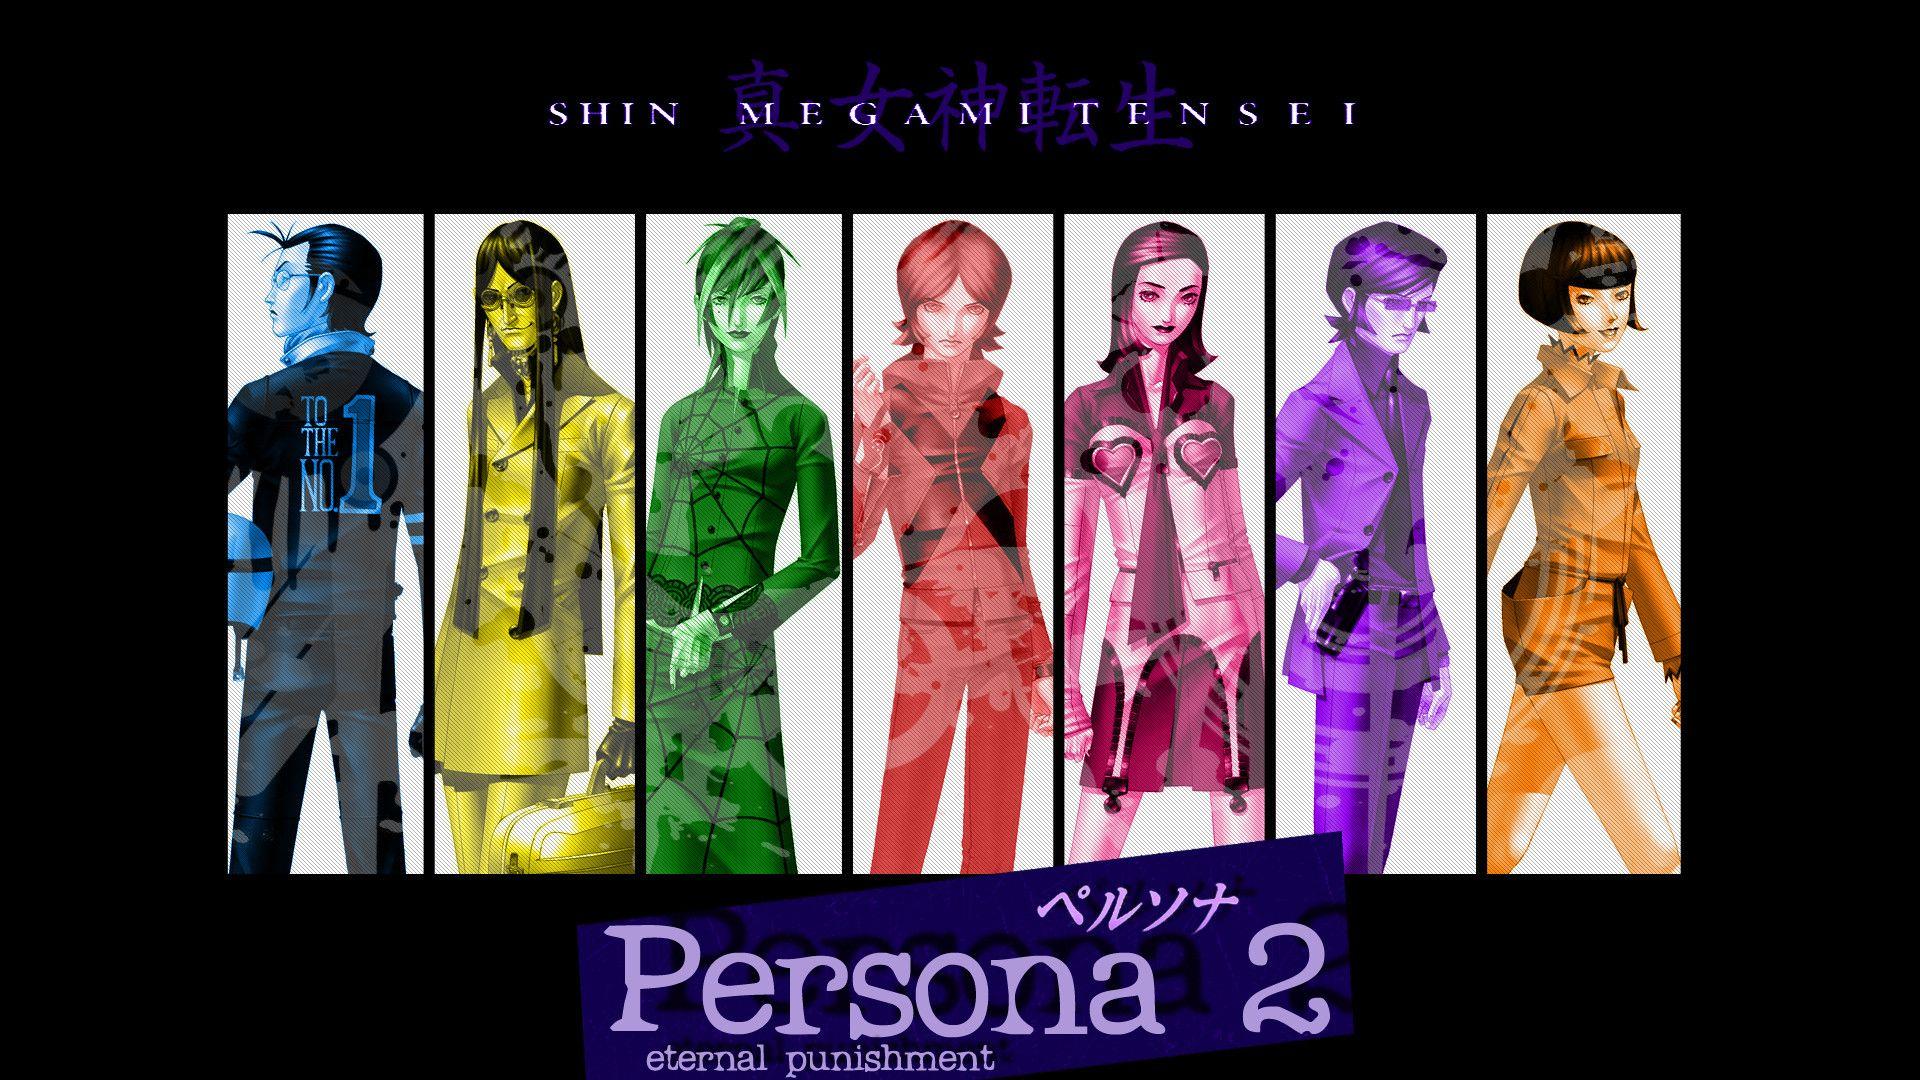 An Unbiased Review of Persona 2: Eternal Punishment. My Sword Is